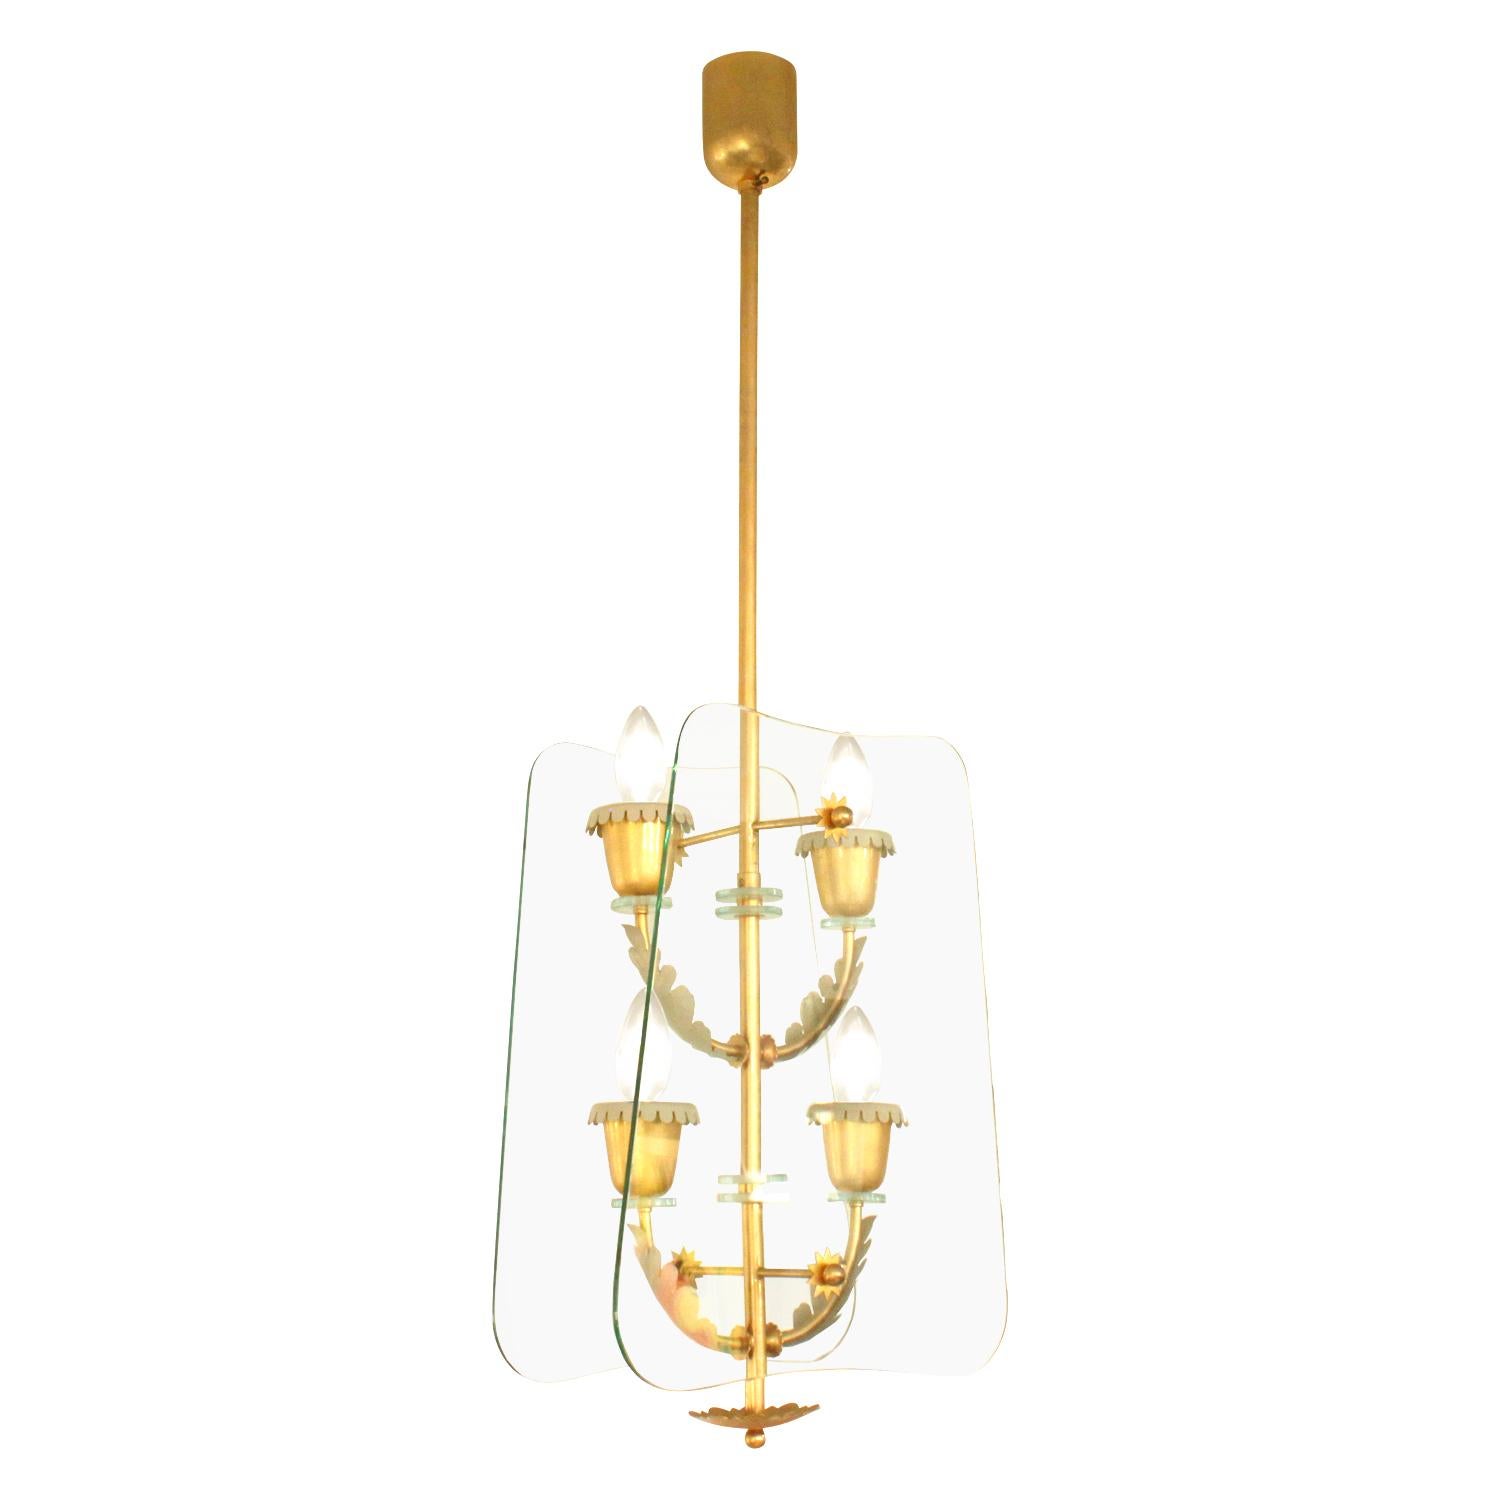 4-light pendant chandelier in brass and glass attributed to Pietro Chiesa for Fontana Arte, Italy, 1940s. This light is extremely elegant.